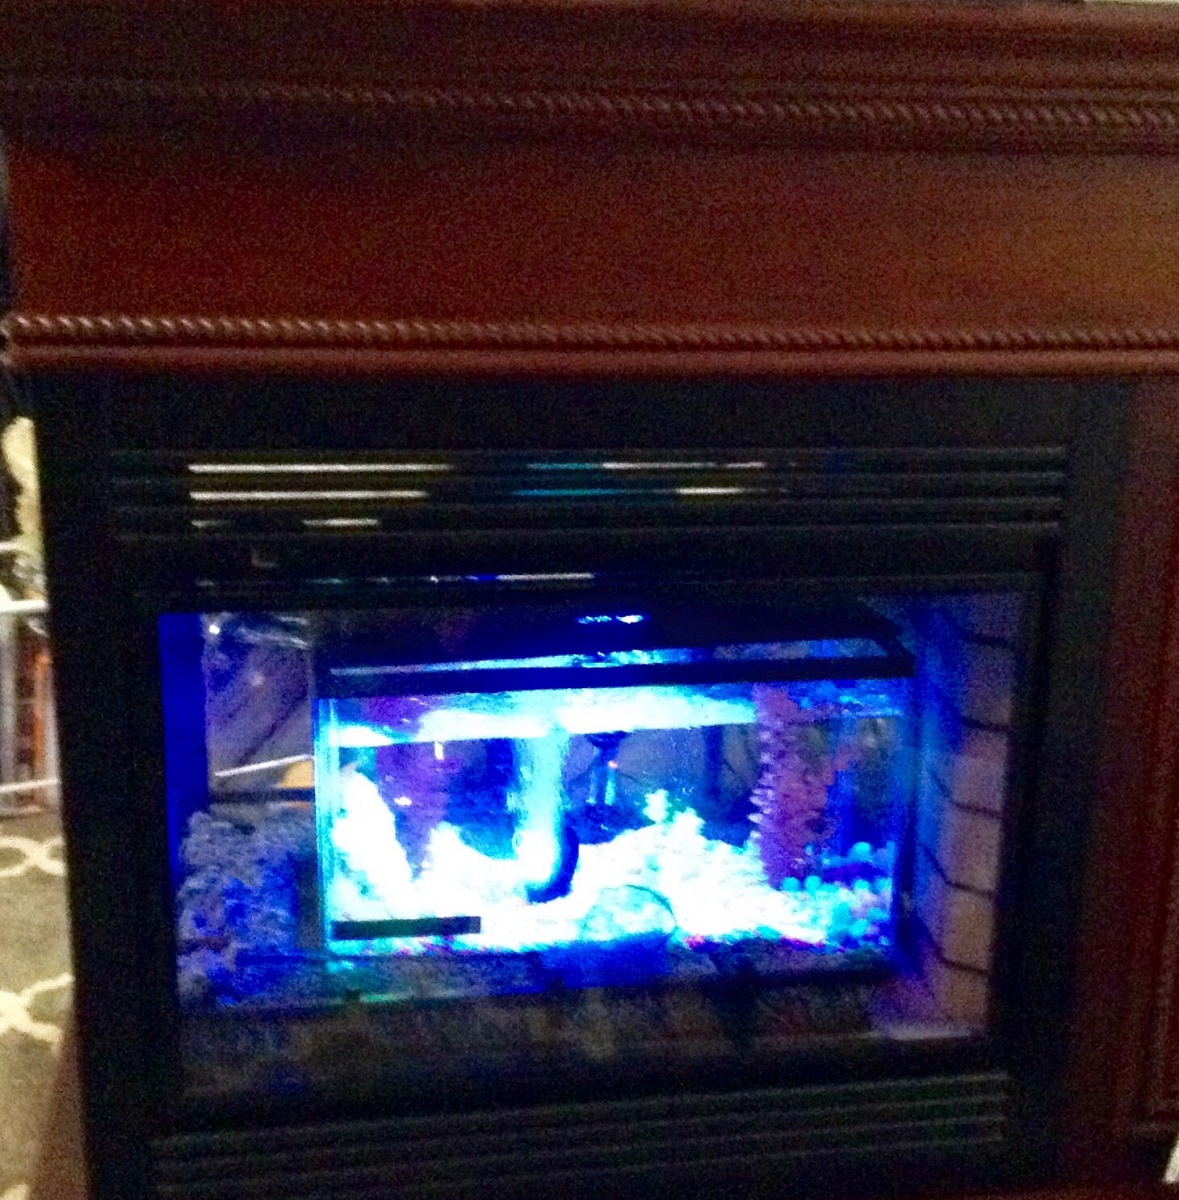 This is the Penninsula fireplace in which I removed the inner workings and repurposed the Penninsula with my 10 gal. GloFish tank. I don't have fish y